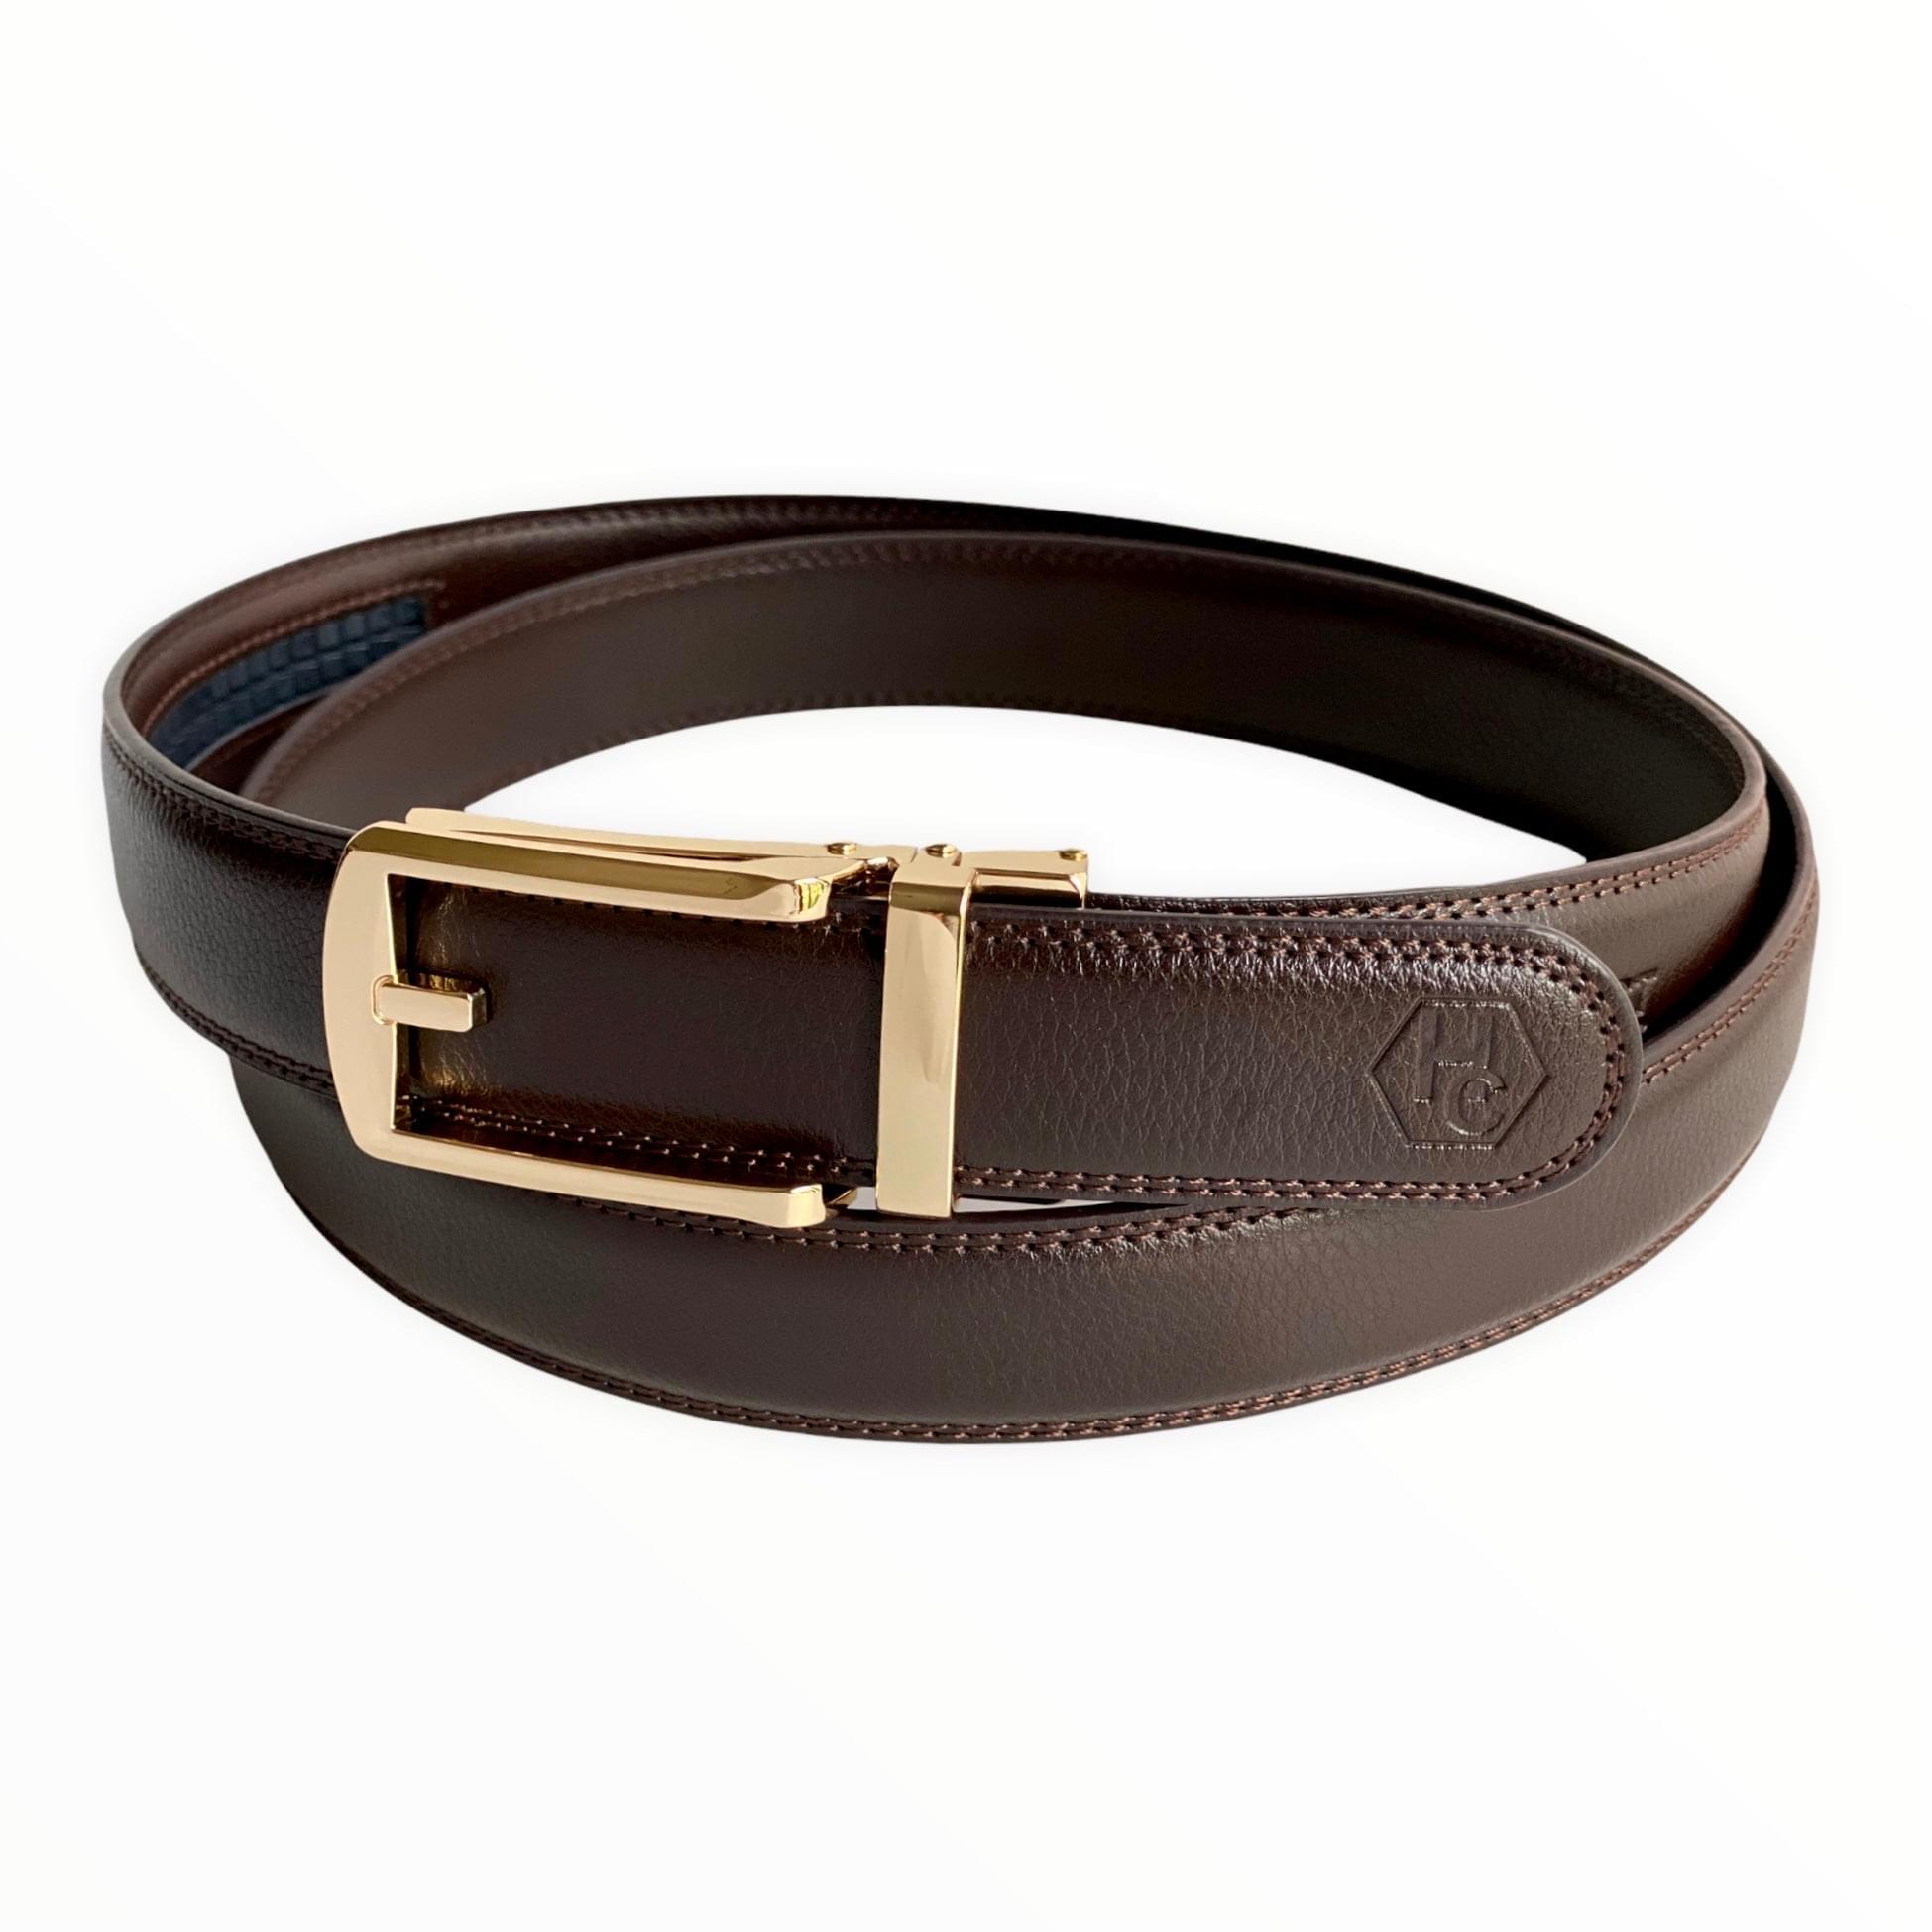 1.15" Genuine Leather Dark Brown Strap & Automatic Buckle Gold Hollow